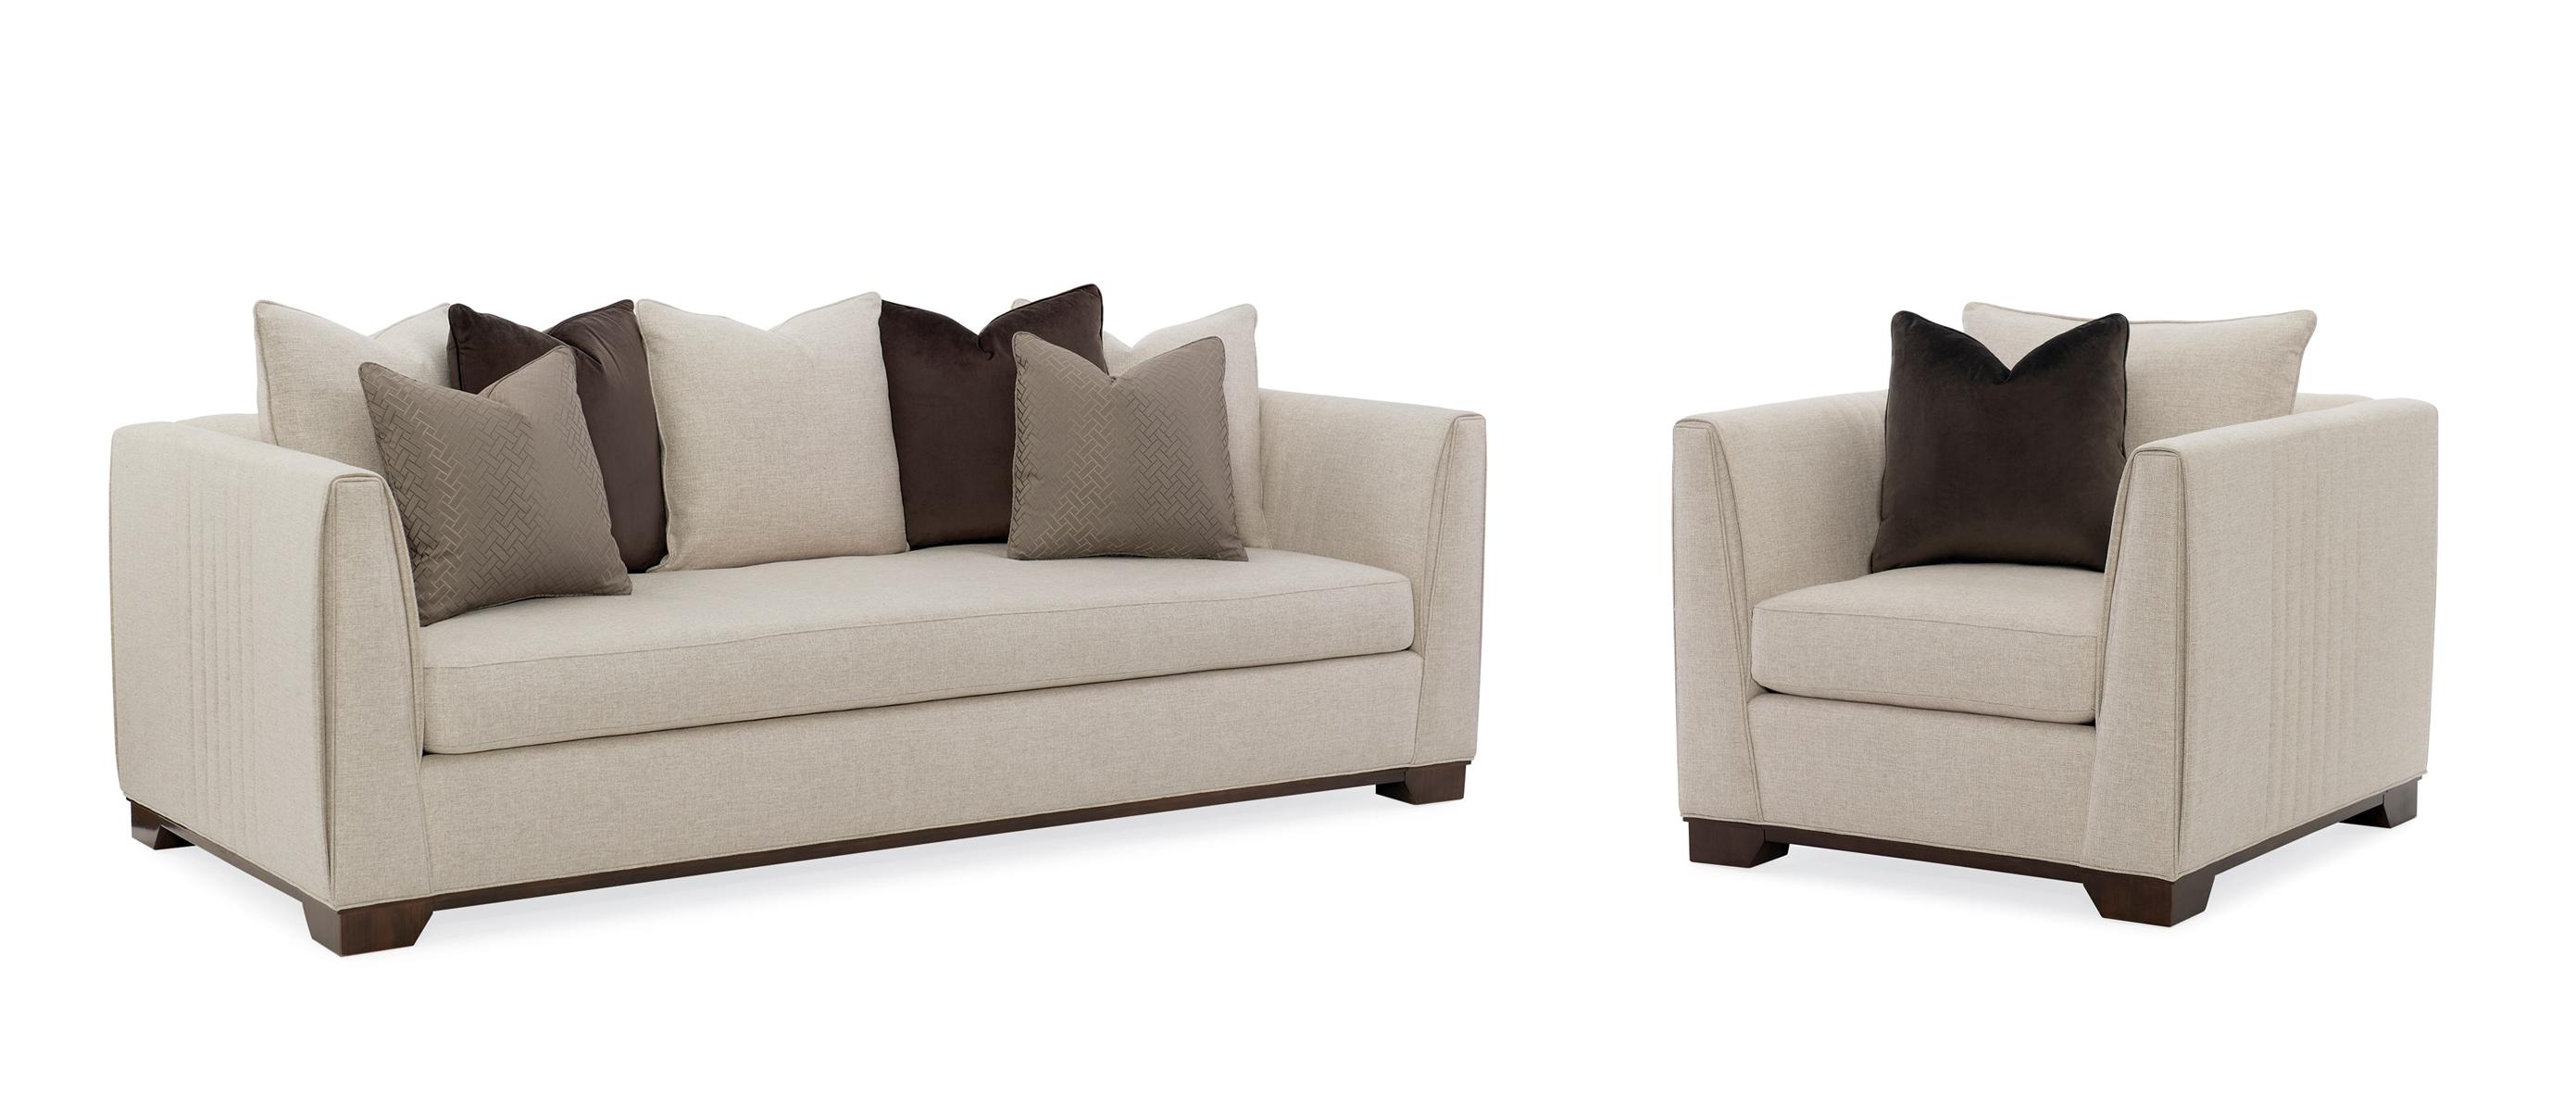 Contemporary Sofa and Chair MODERNE SOFA M020-417-012-A-Set-2 in Brown, Beige Fabric